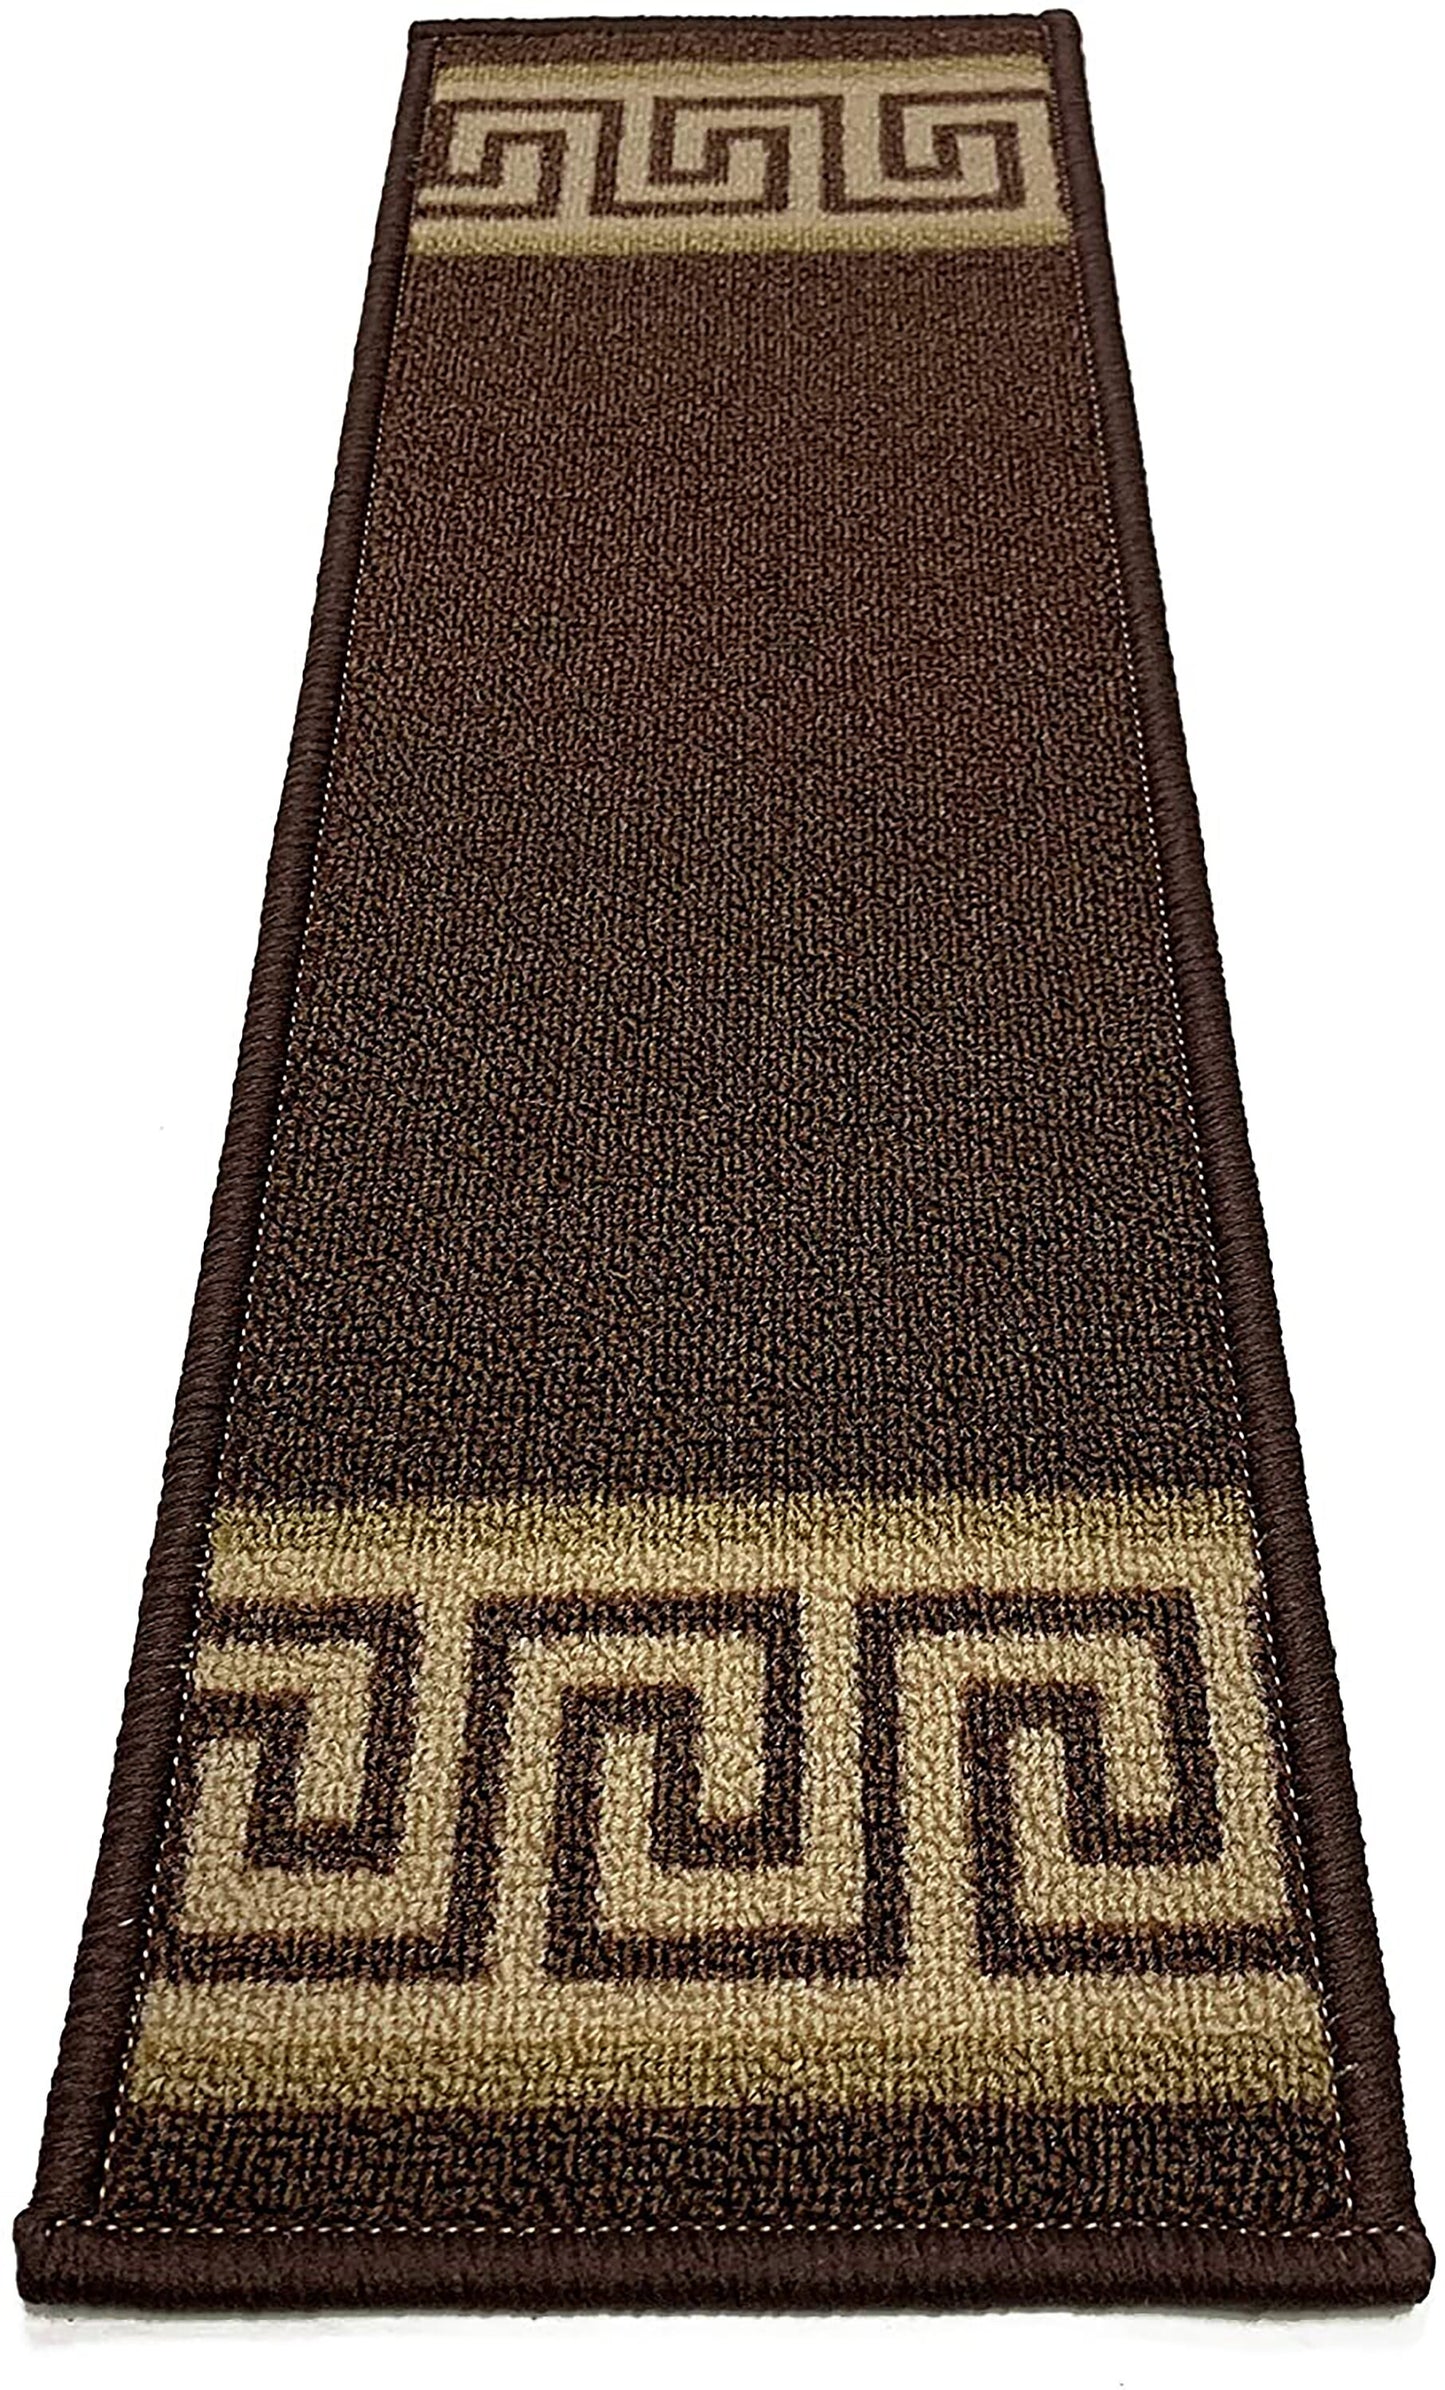 Machine Washable Stair Tread Meander Greek Key Bordered Brown Skid Resistant Latex Back Carpet Stair Treads Size 8.5" x 26" Many Set Options